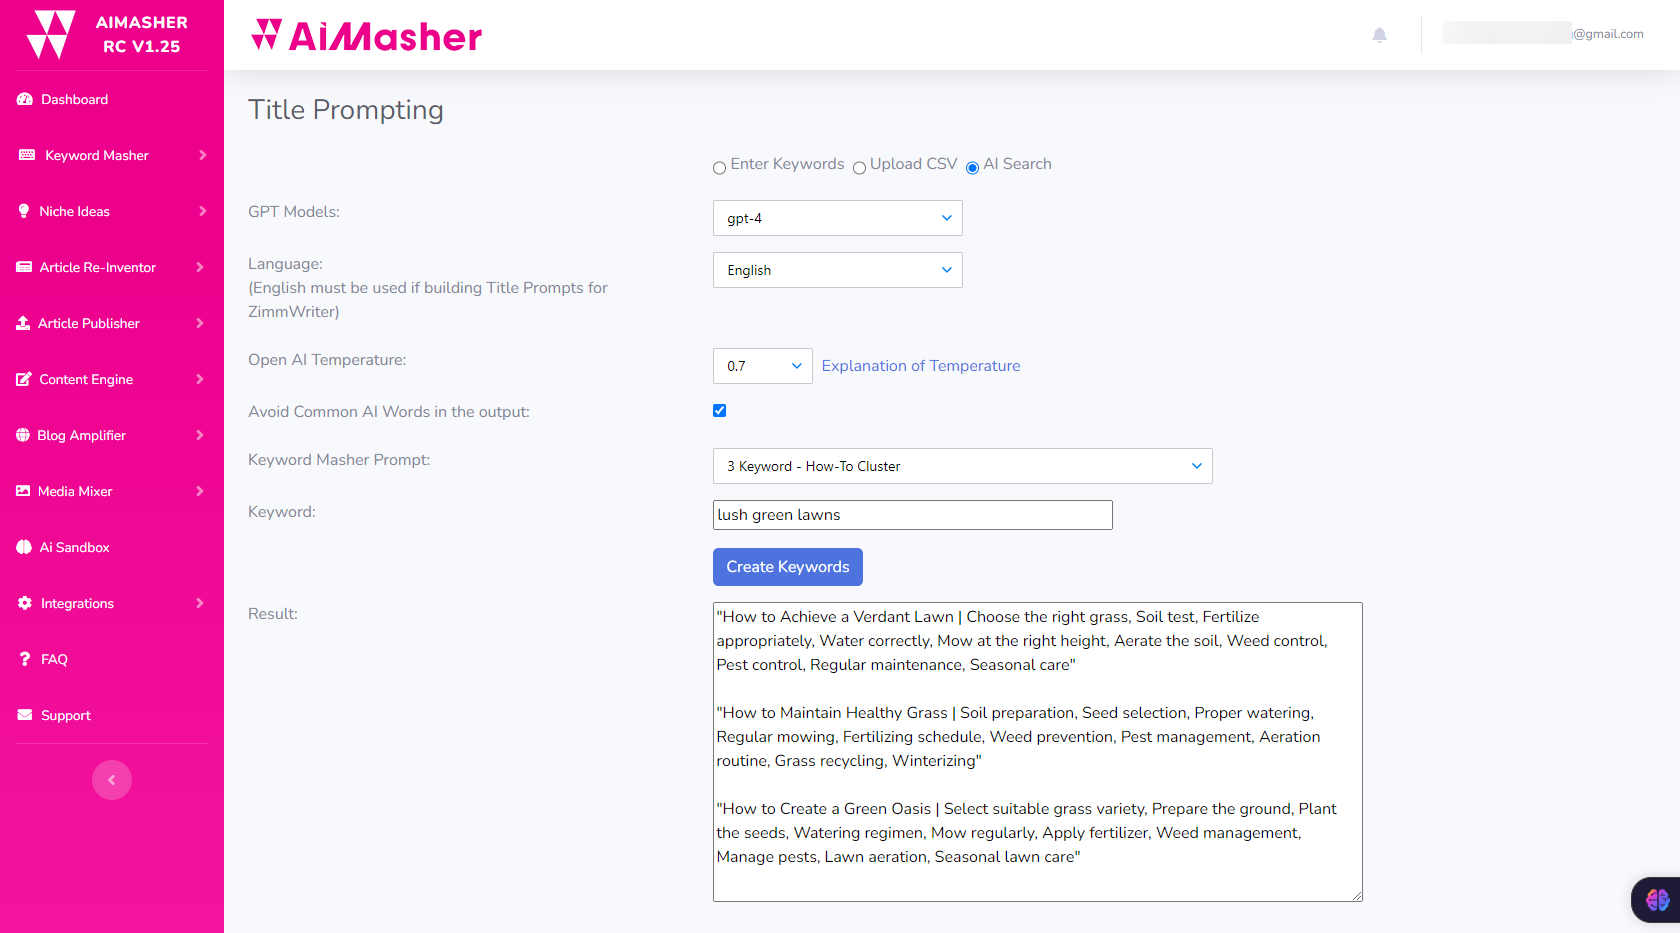 Image of the Title Prompting page in AiMasher's Keyword Masher app